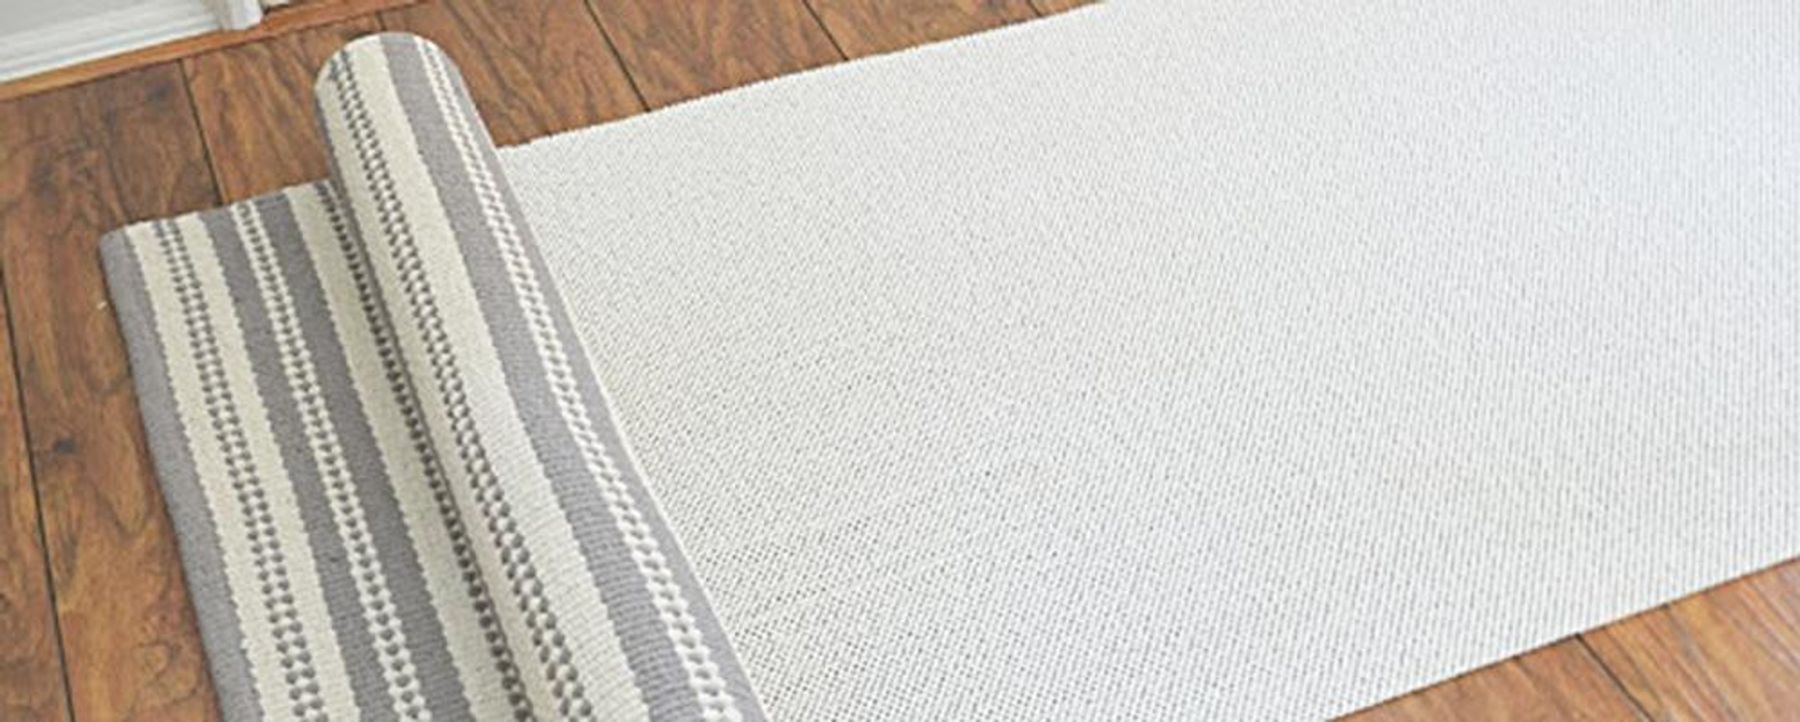 10 Best Rug Pads Review - The Jerusalem Post